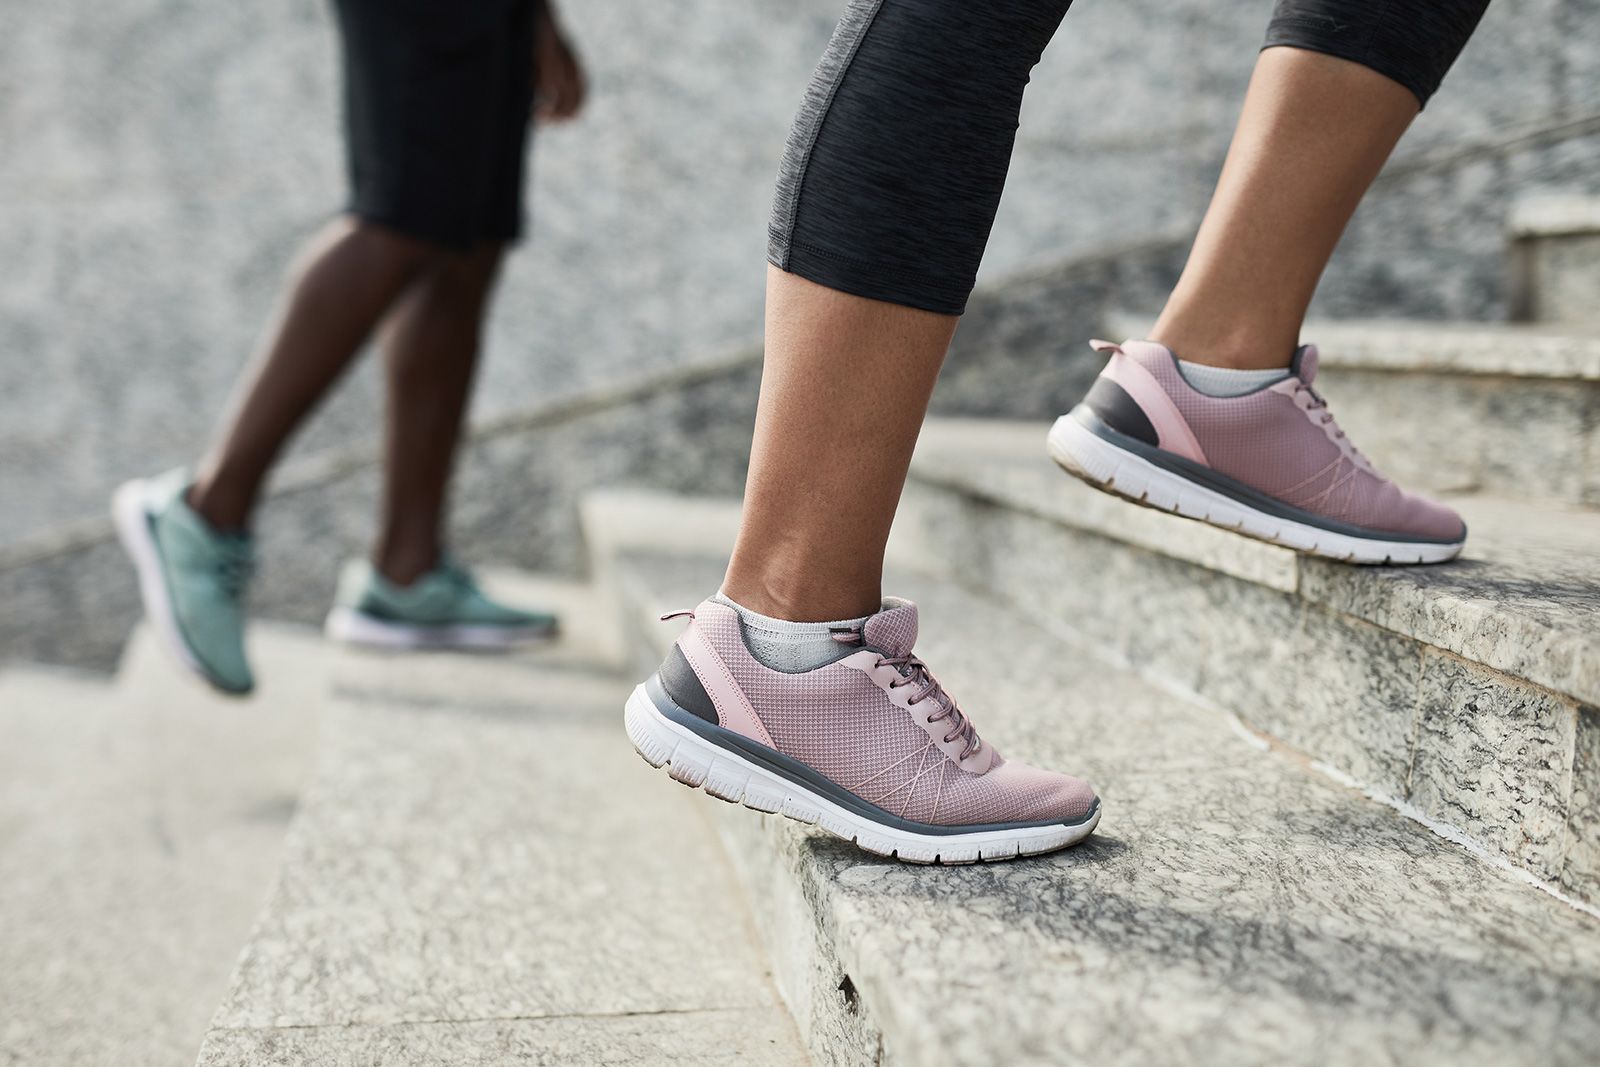 You Don't Really Need 10,000 Daily Steps to Stay Healthy